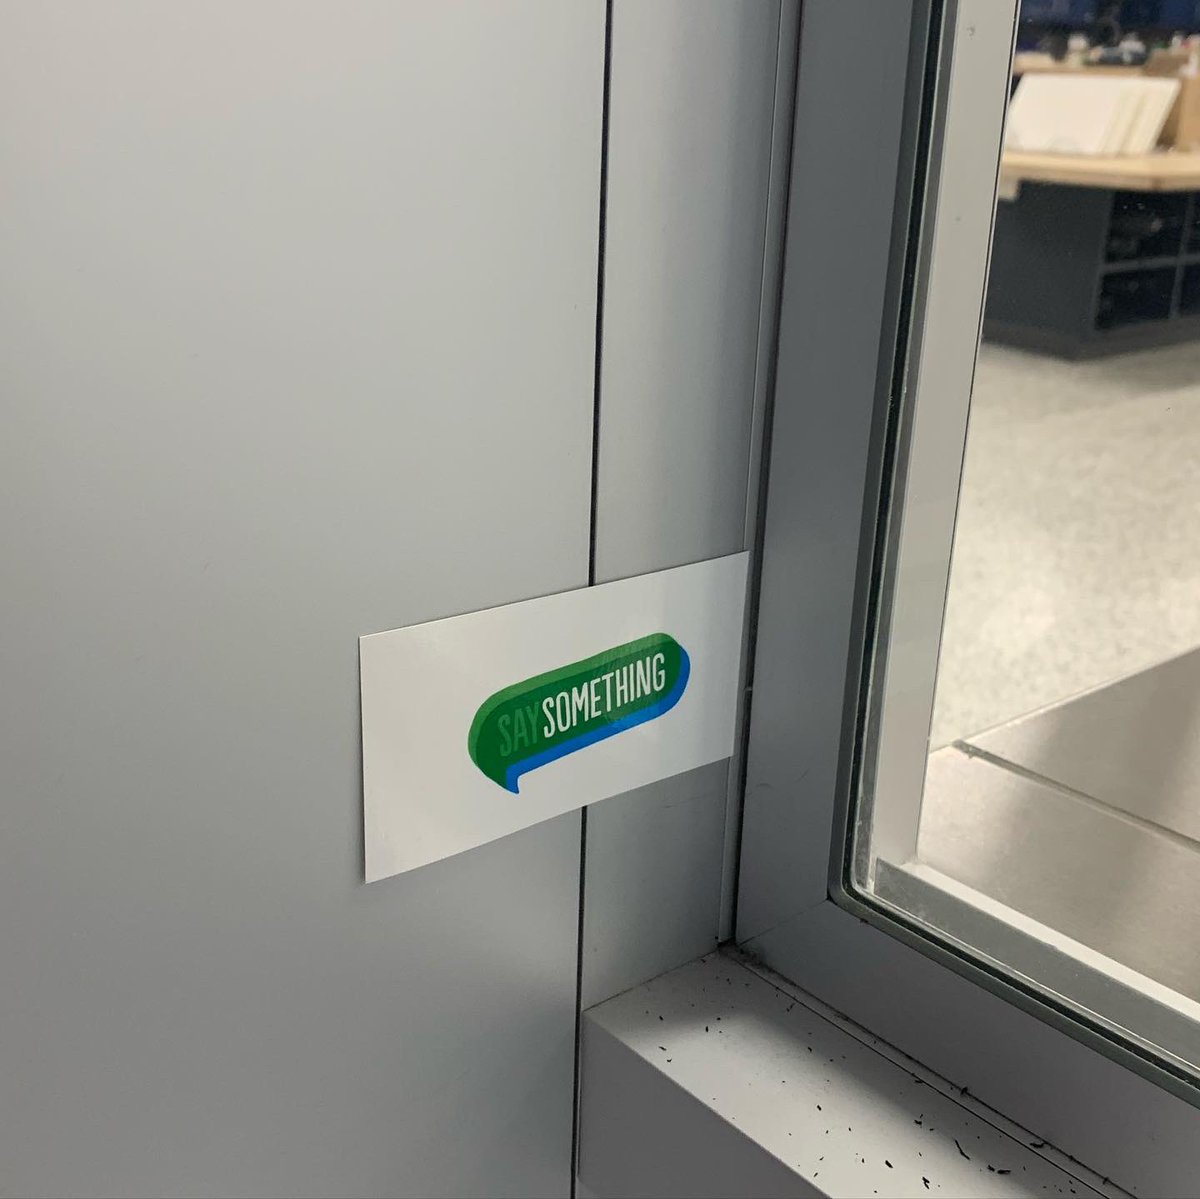 SAVE members hung up “say something” logos all around the school for a #saysomethingweek scavenger hunt. Students, if you find one bring it to Handlos’s room (215) for a prize and remember your pledge to say something!